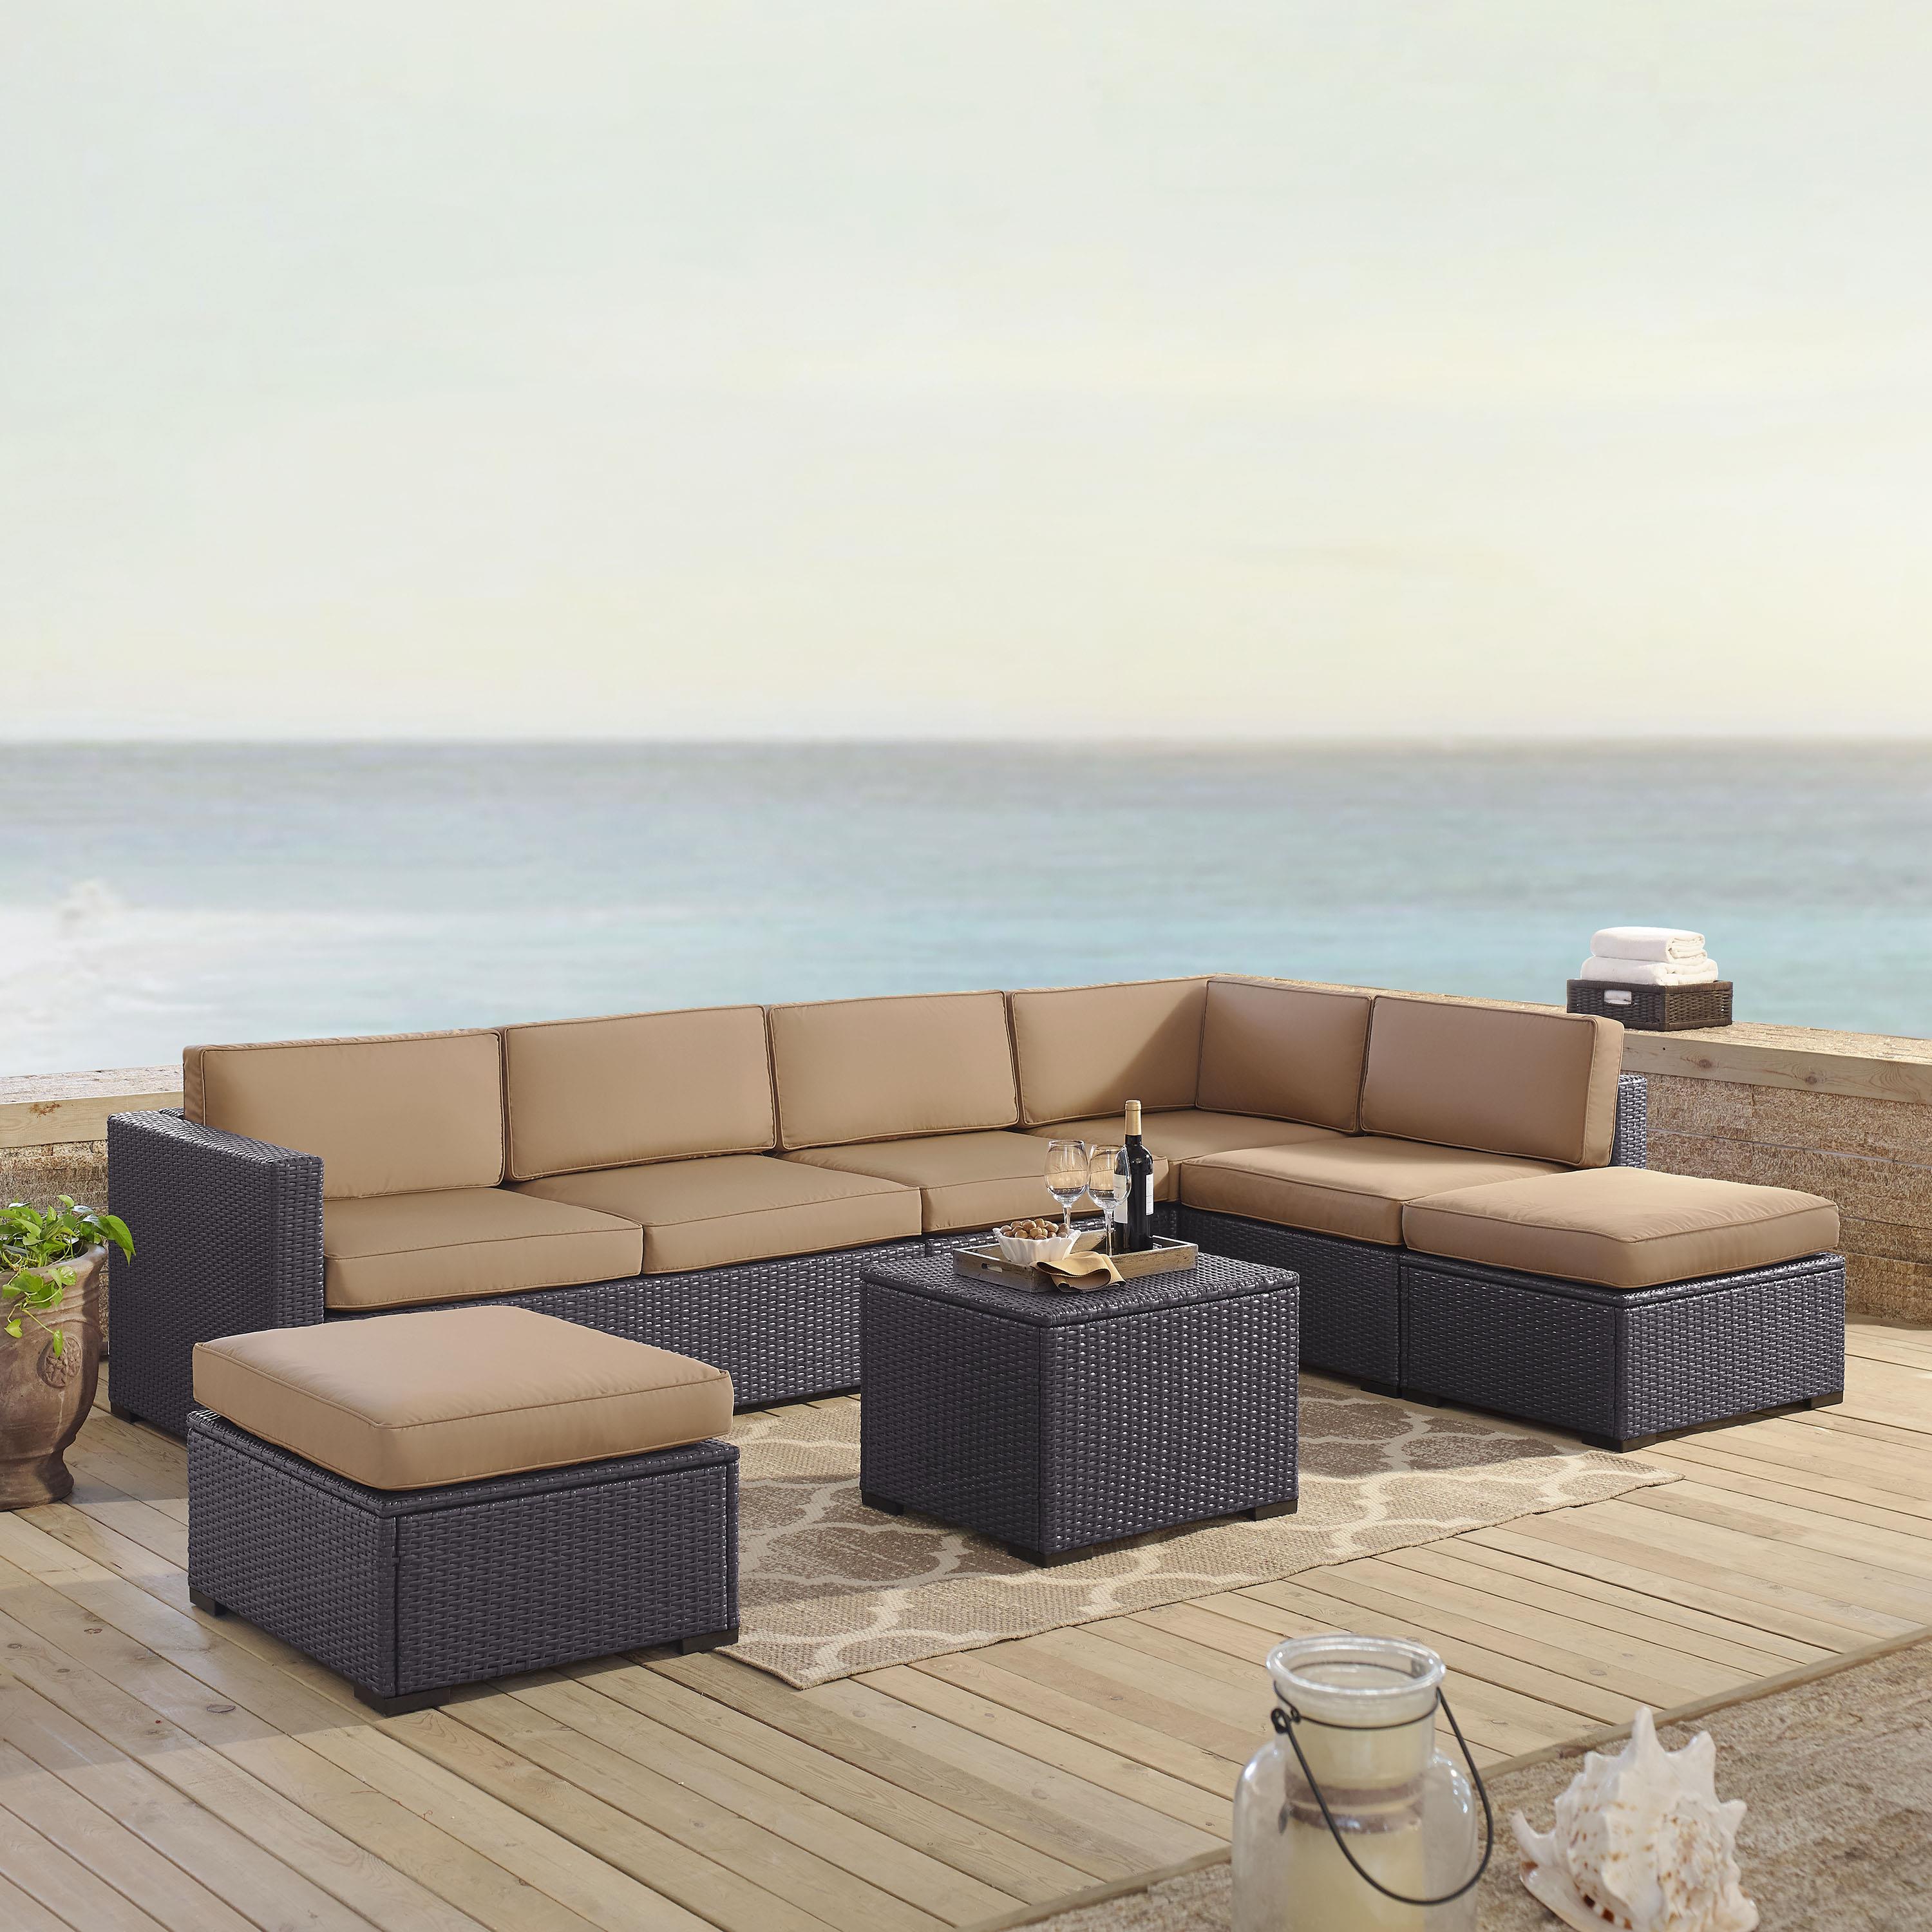 BISCAYNE 7 PERSON OUTDOOR WICKER SEATING SET IN MOCHA - TWO LOVESEATS, ONE ARMLESS CHAIR, COFFEE TABLE, TWO OTTOMANS - image 4 of 4